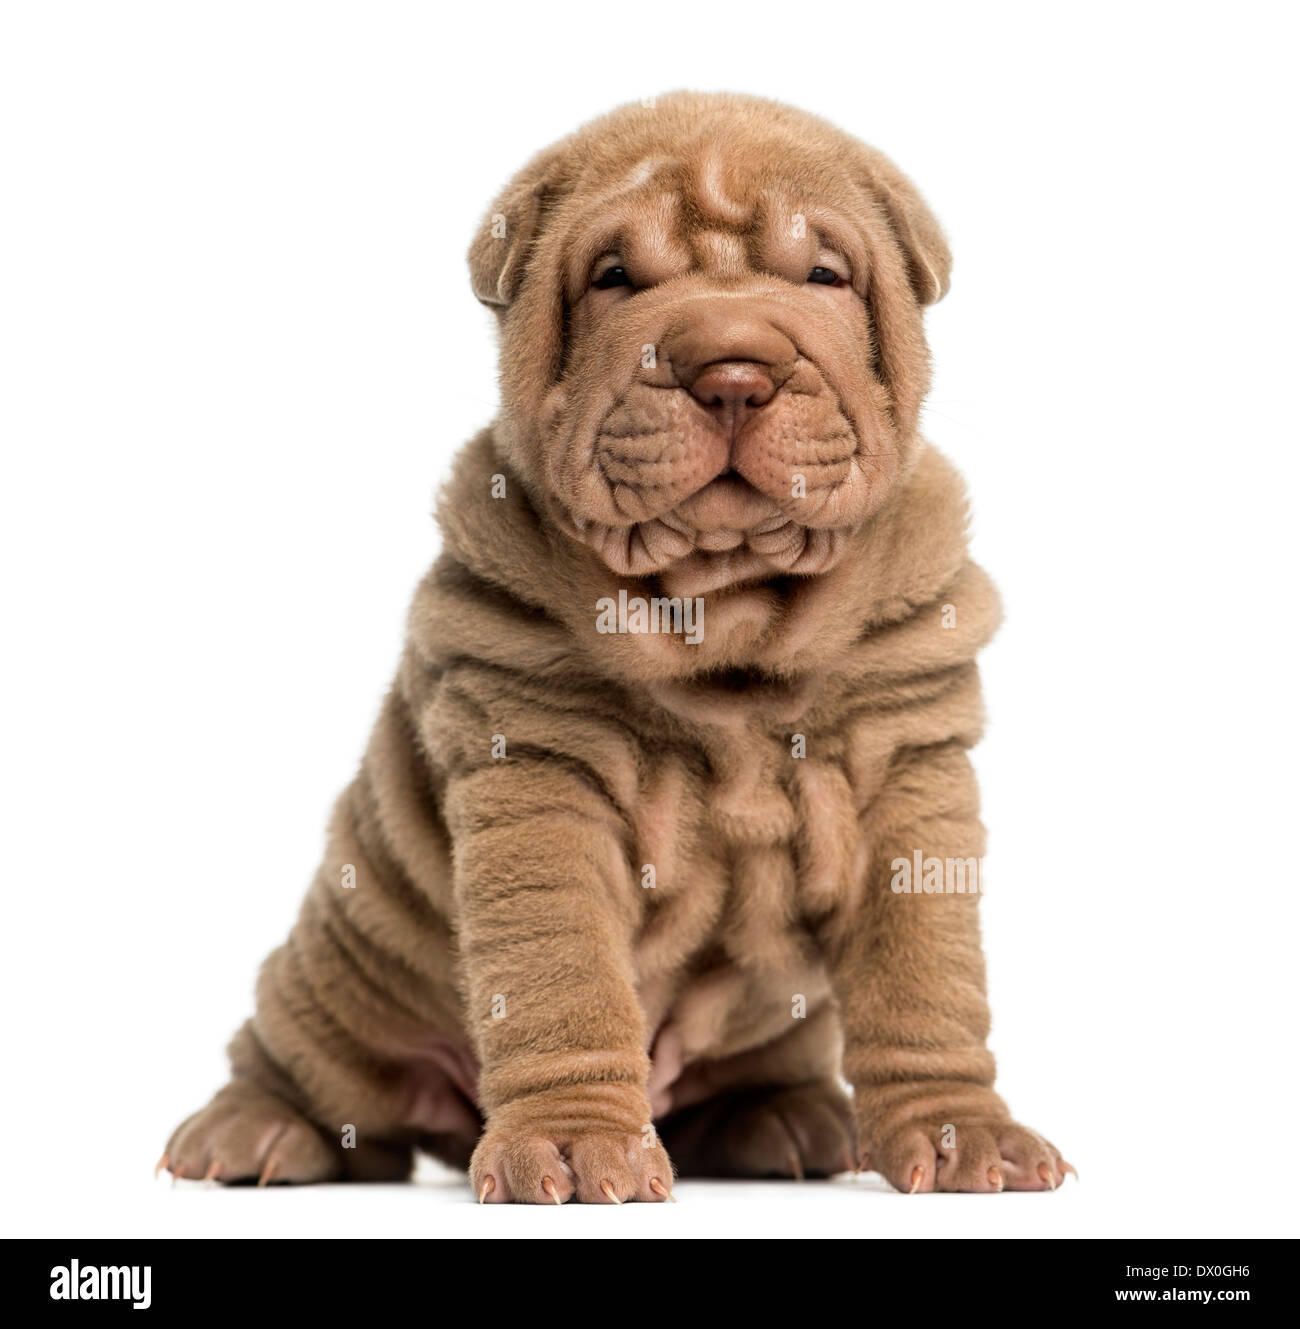 Shar Pei puppy sitting, looking at the camera against white background Stock Photo